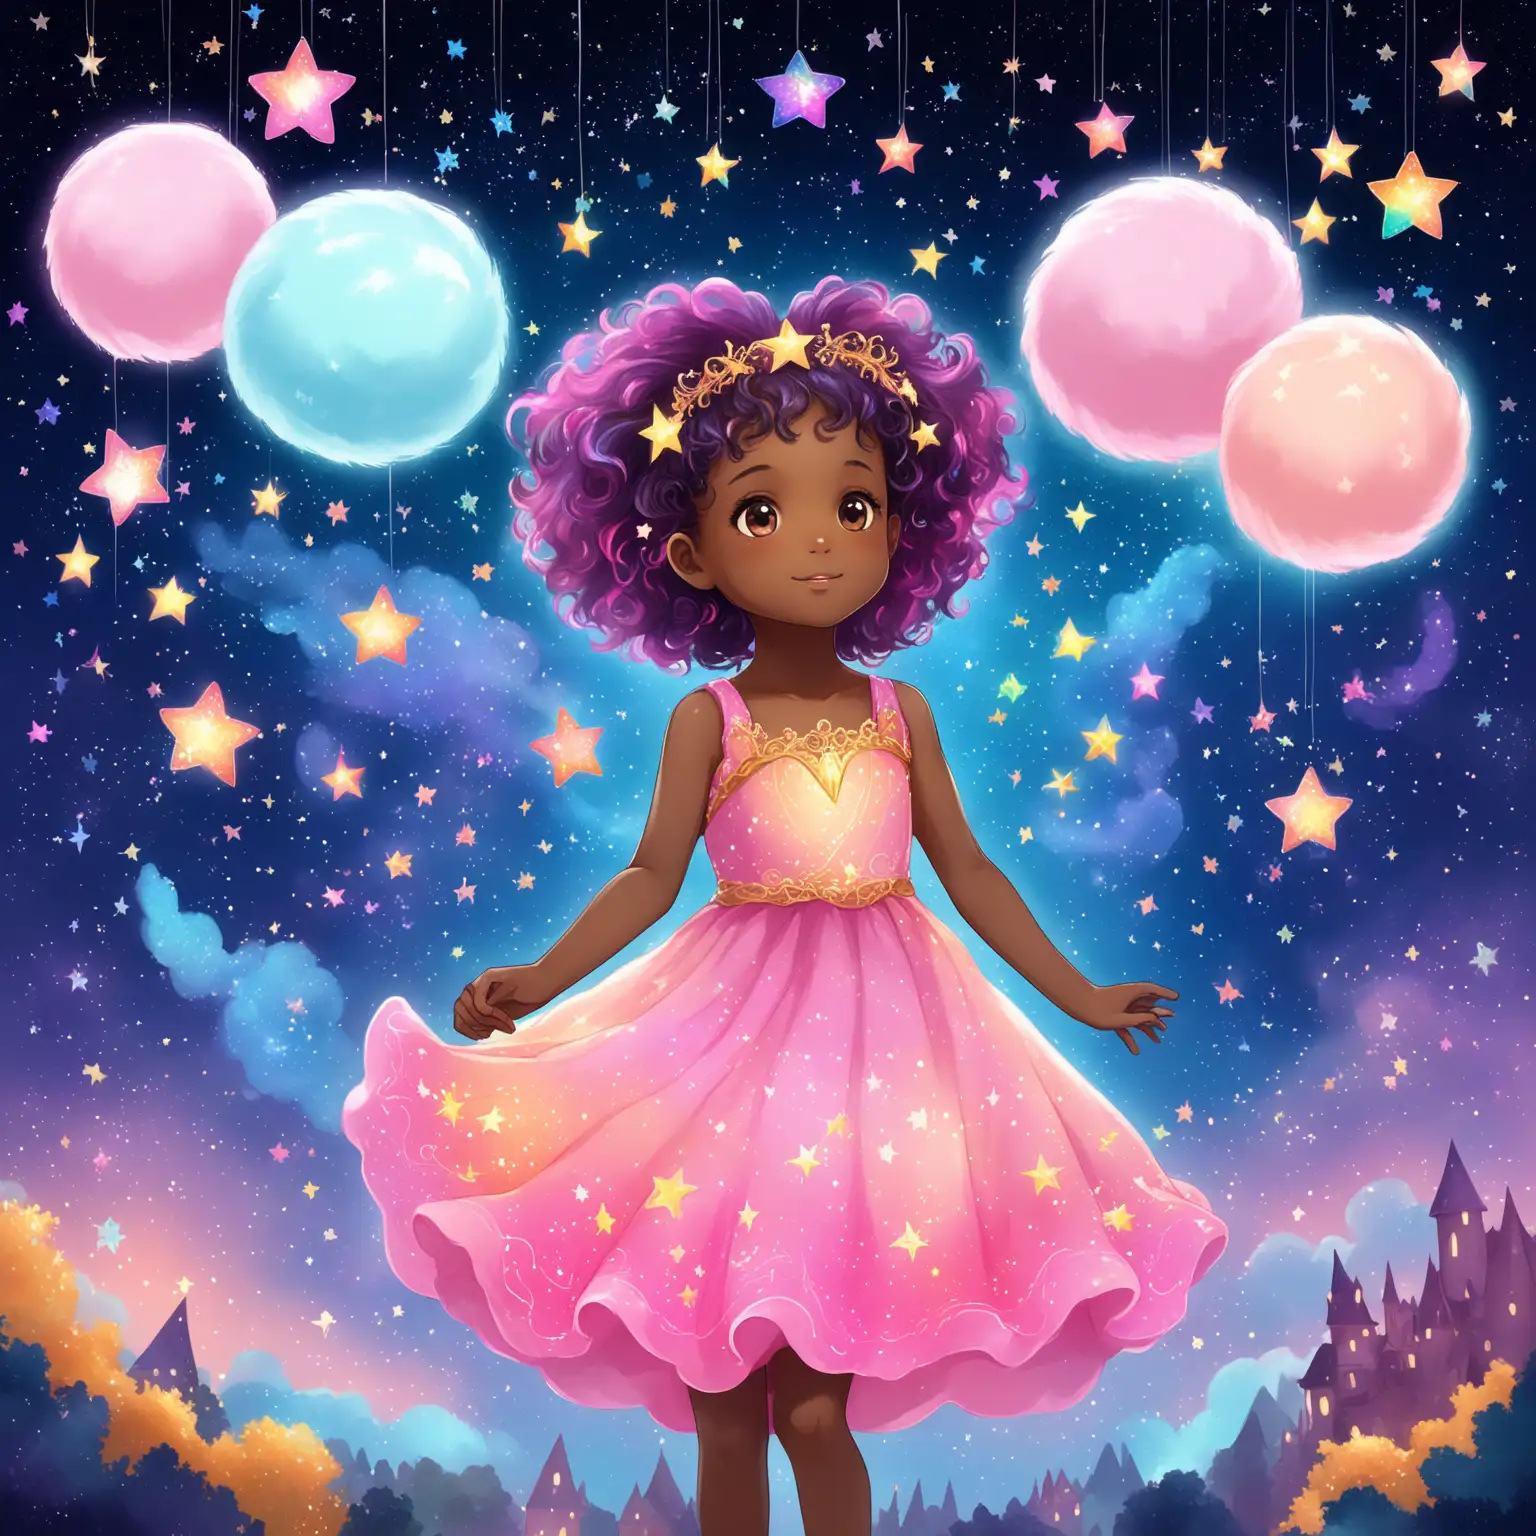 Whimsical Black Girl with Cotton Candy Hair Dancing in Magical Fantasy